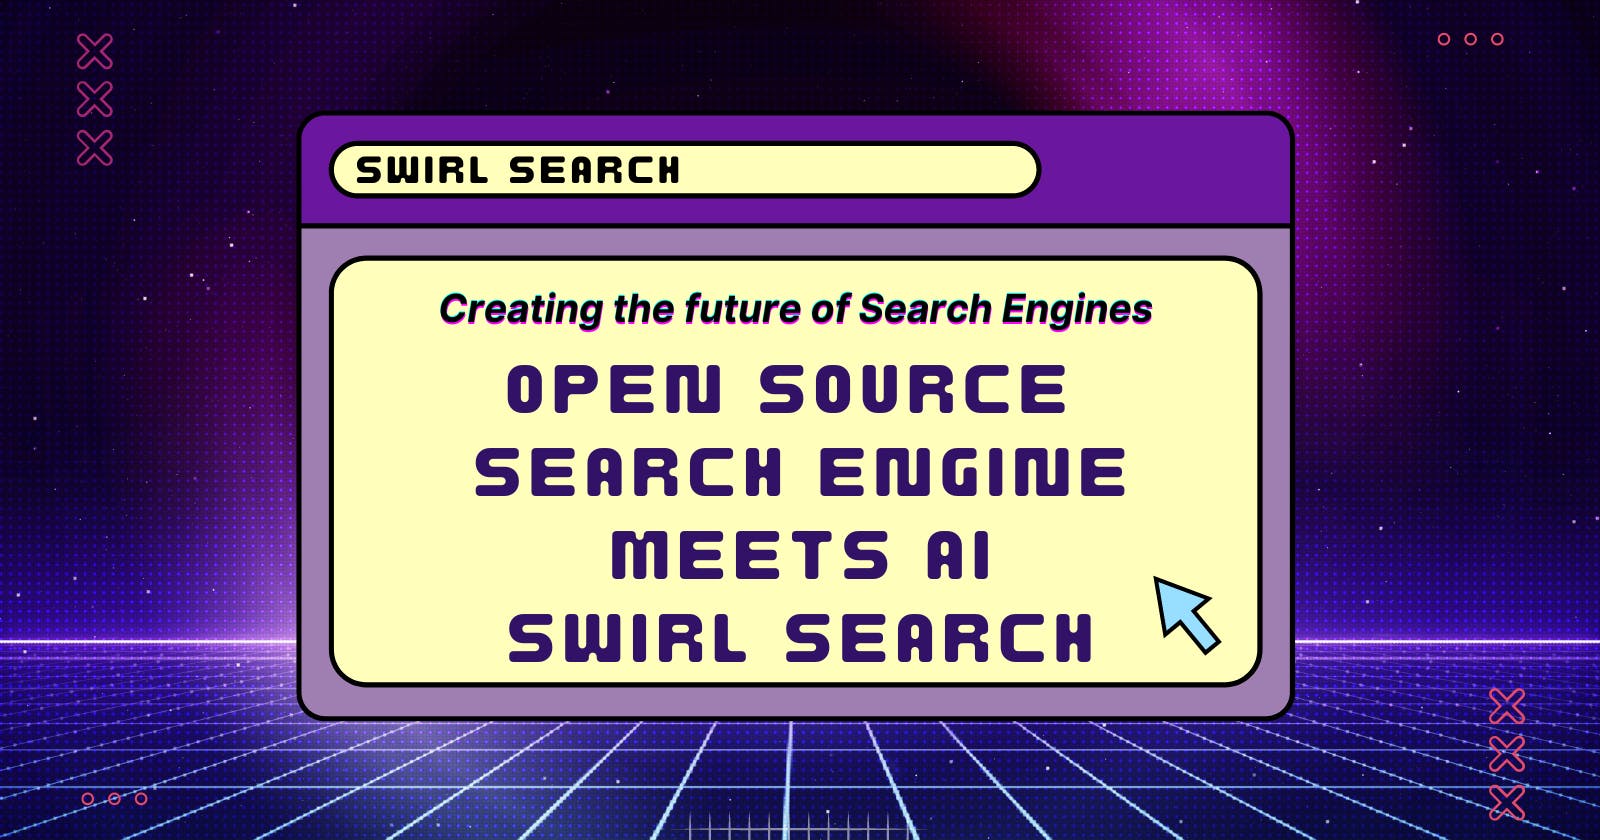 Creating an Open Source Search Platform: Search Engines with AI - Swirl